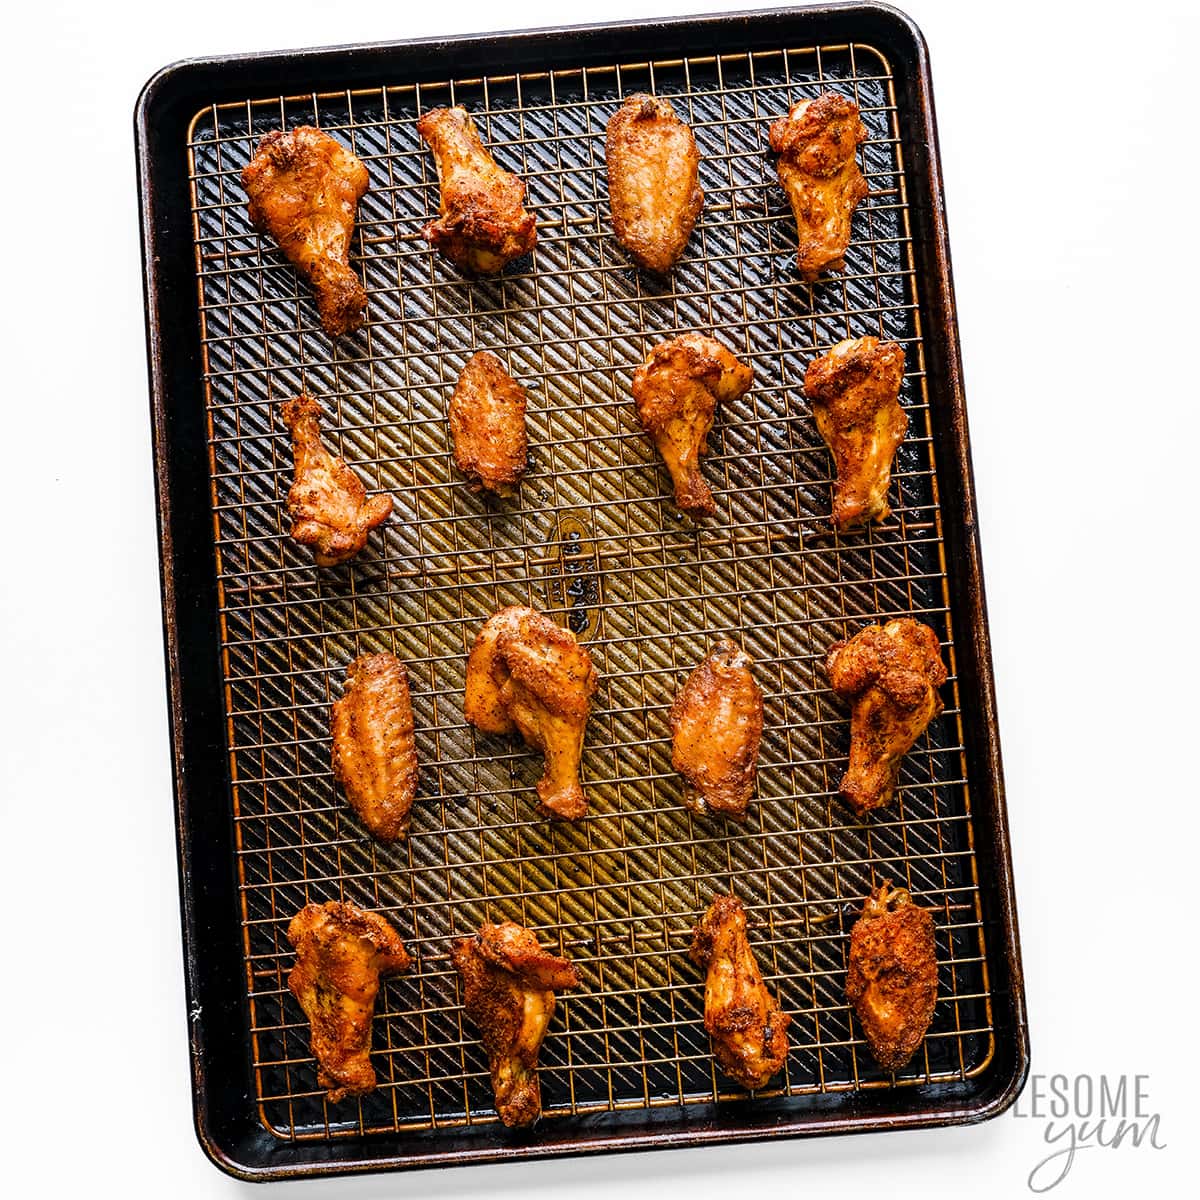 Crispy oven baked chicken wings on a rack over a baking sheet.